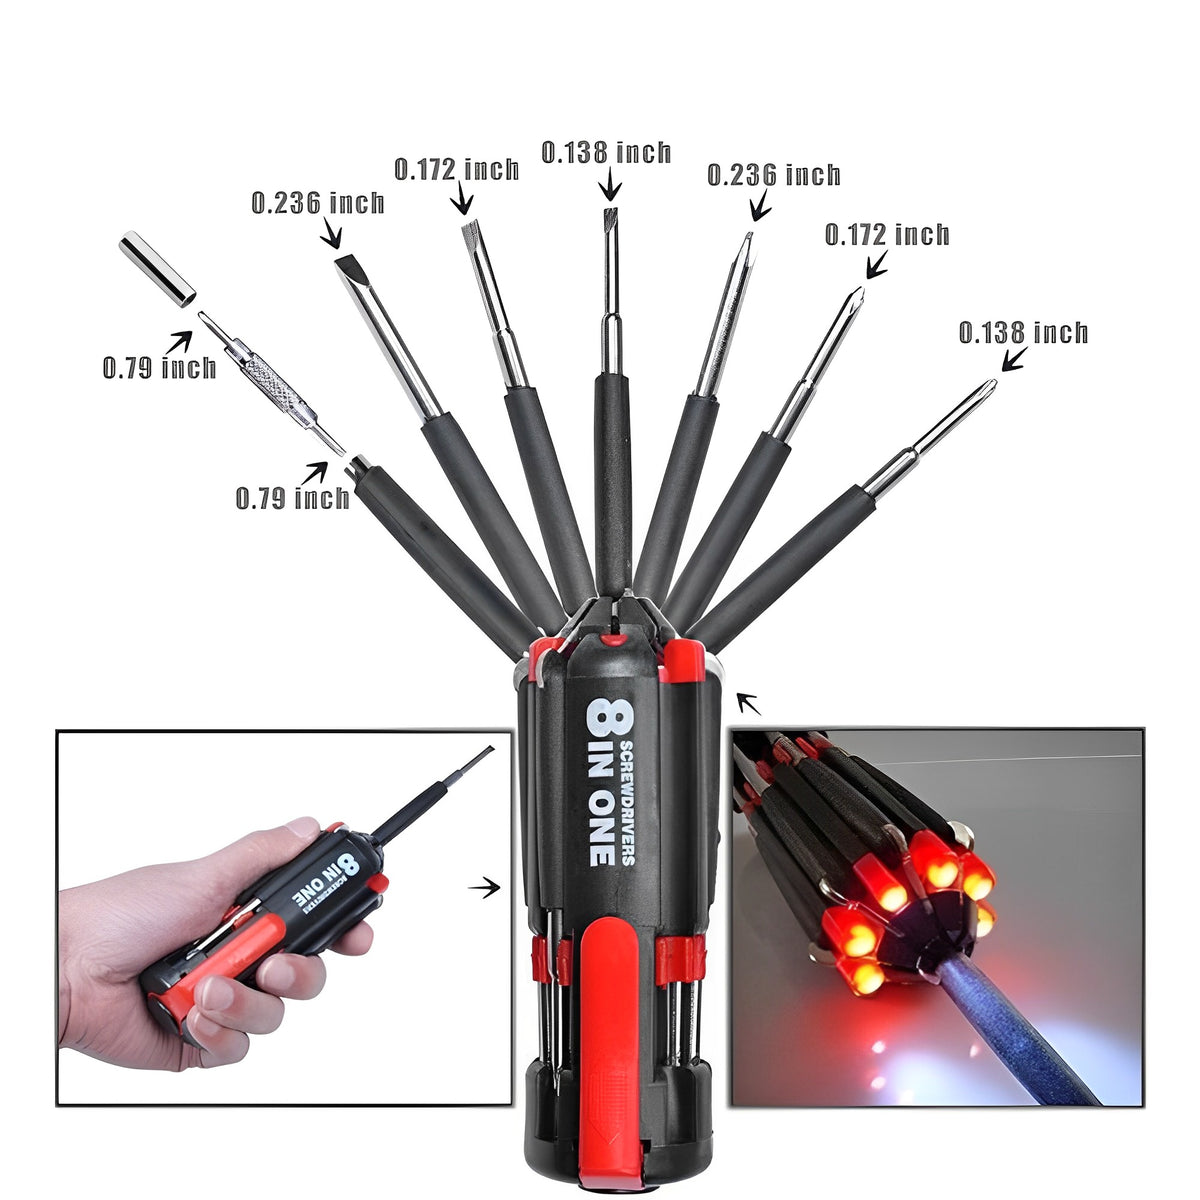 Compact 8 In 1 Multi Screwdriver Tool Set With 6 LED Torch